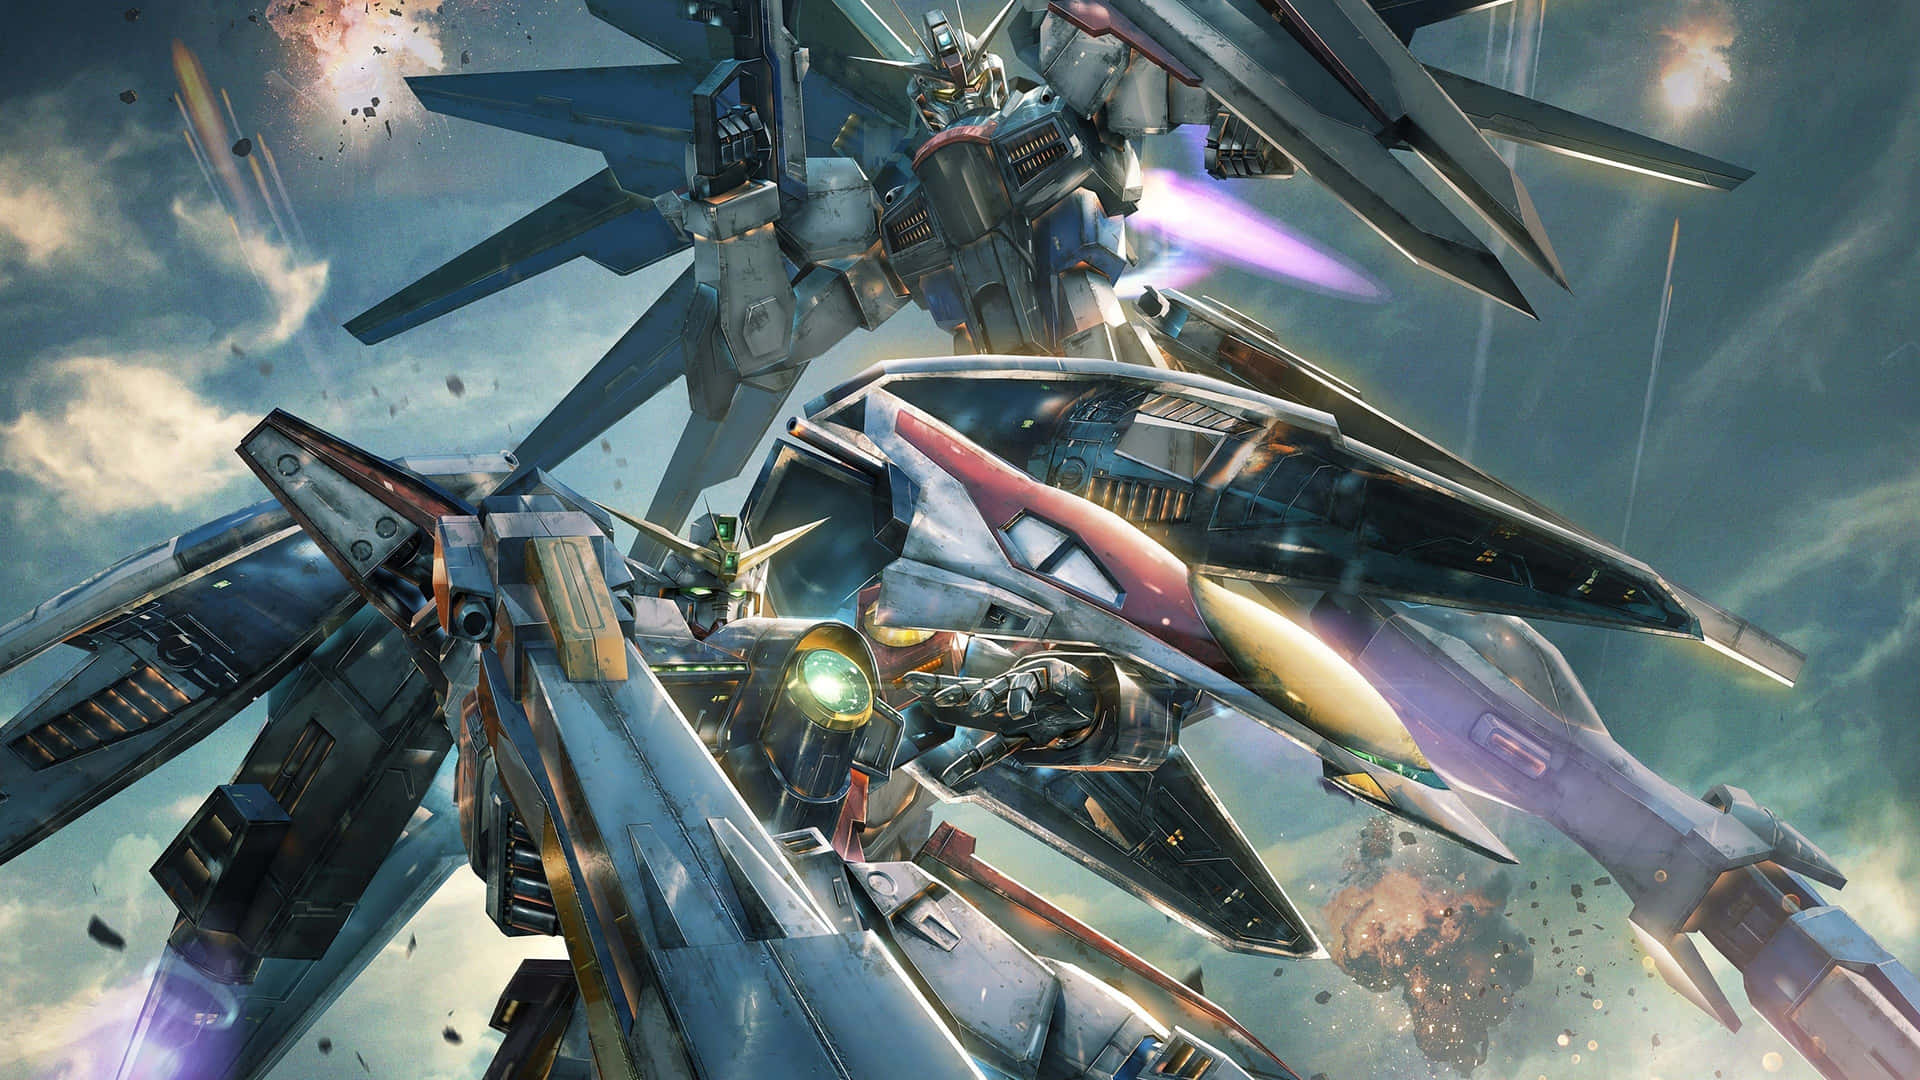 "The Gundam, a massive robotic weapon of war, stands strong, brave and ready against its enemy."